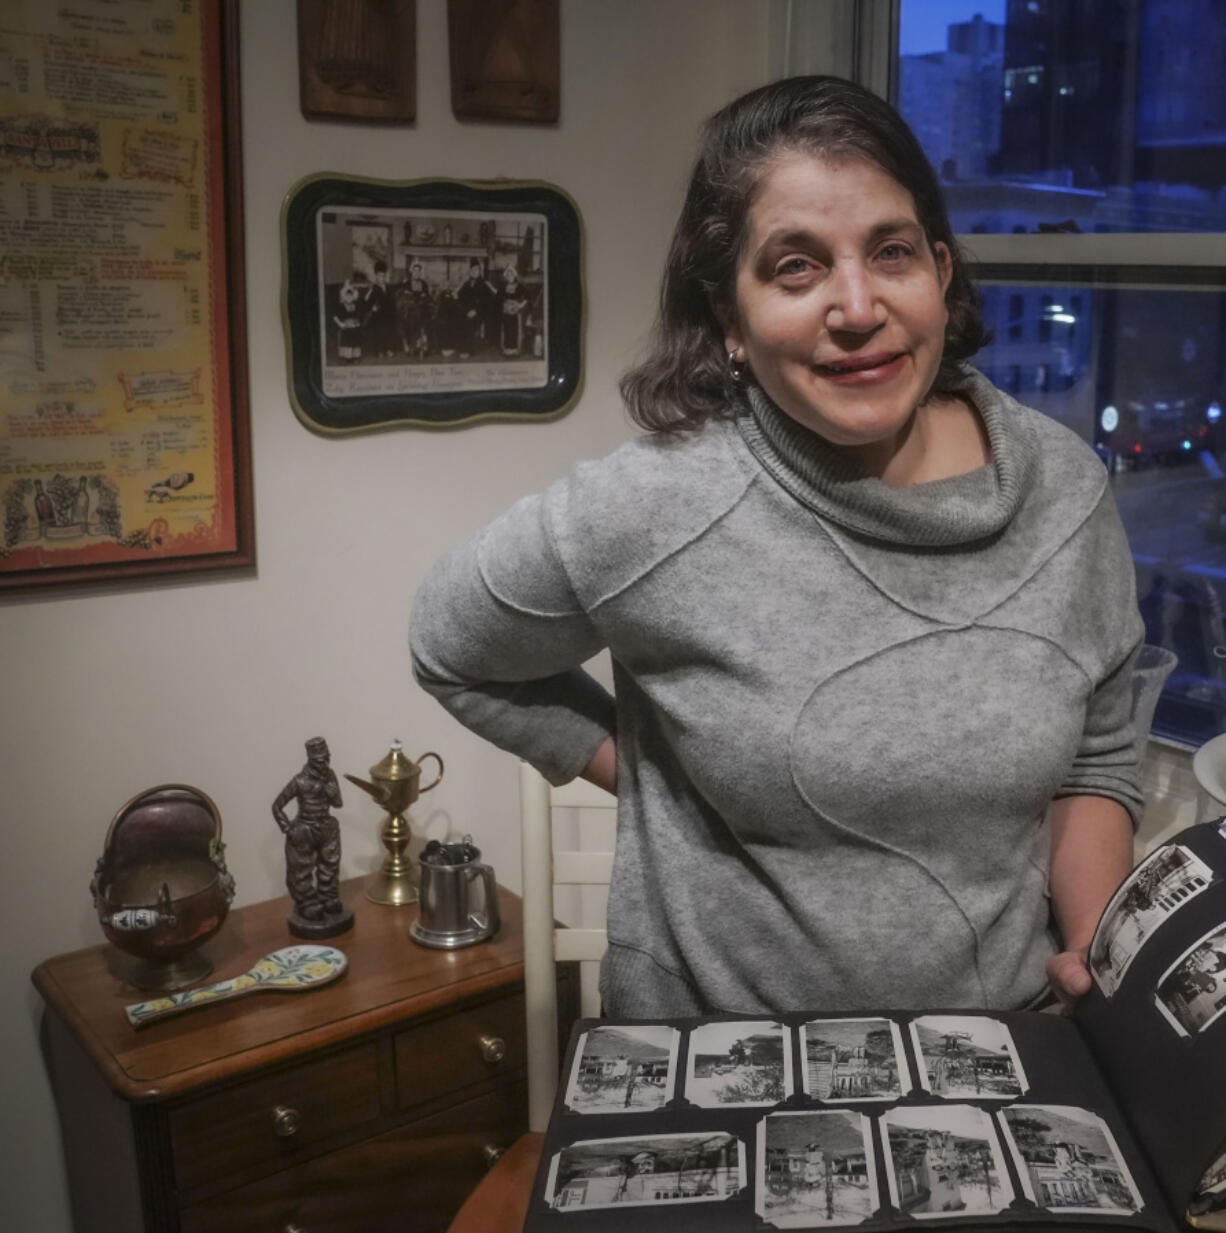 Anne D&rsquo;Innocenzio shows a family album surrounded by momentos from her childhood home Monday in New York. &ldquo;Clearing out Mom&rsquo;s house helped me fully appreciate her passion for a life full of family, art, books and travel,&rdquo; D&rsquo;Innocenzio said.